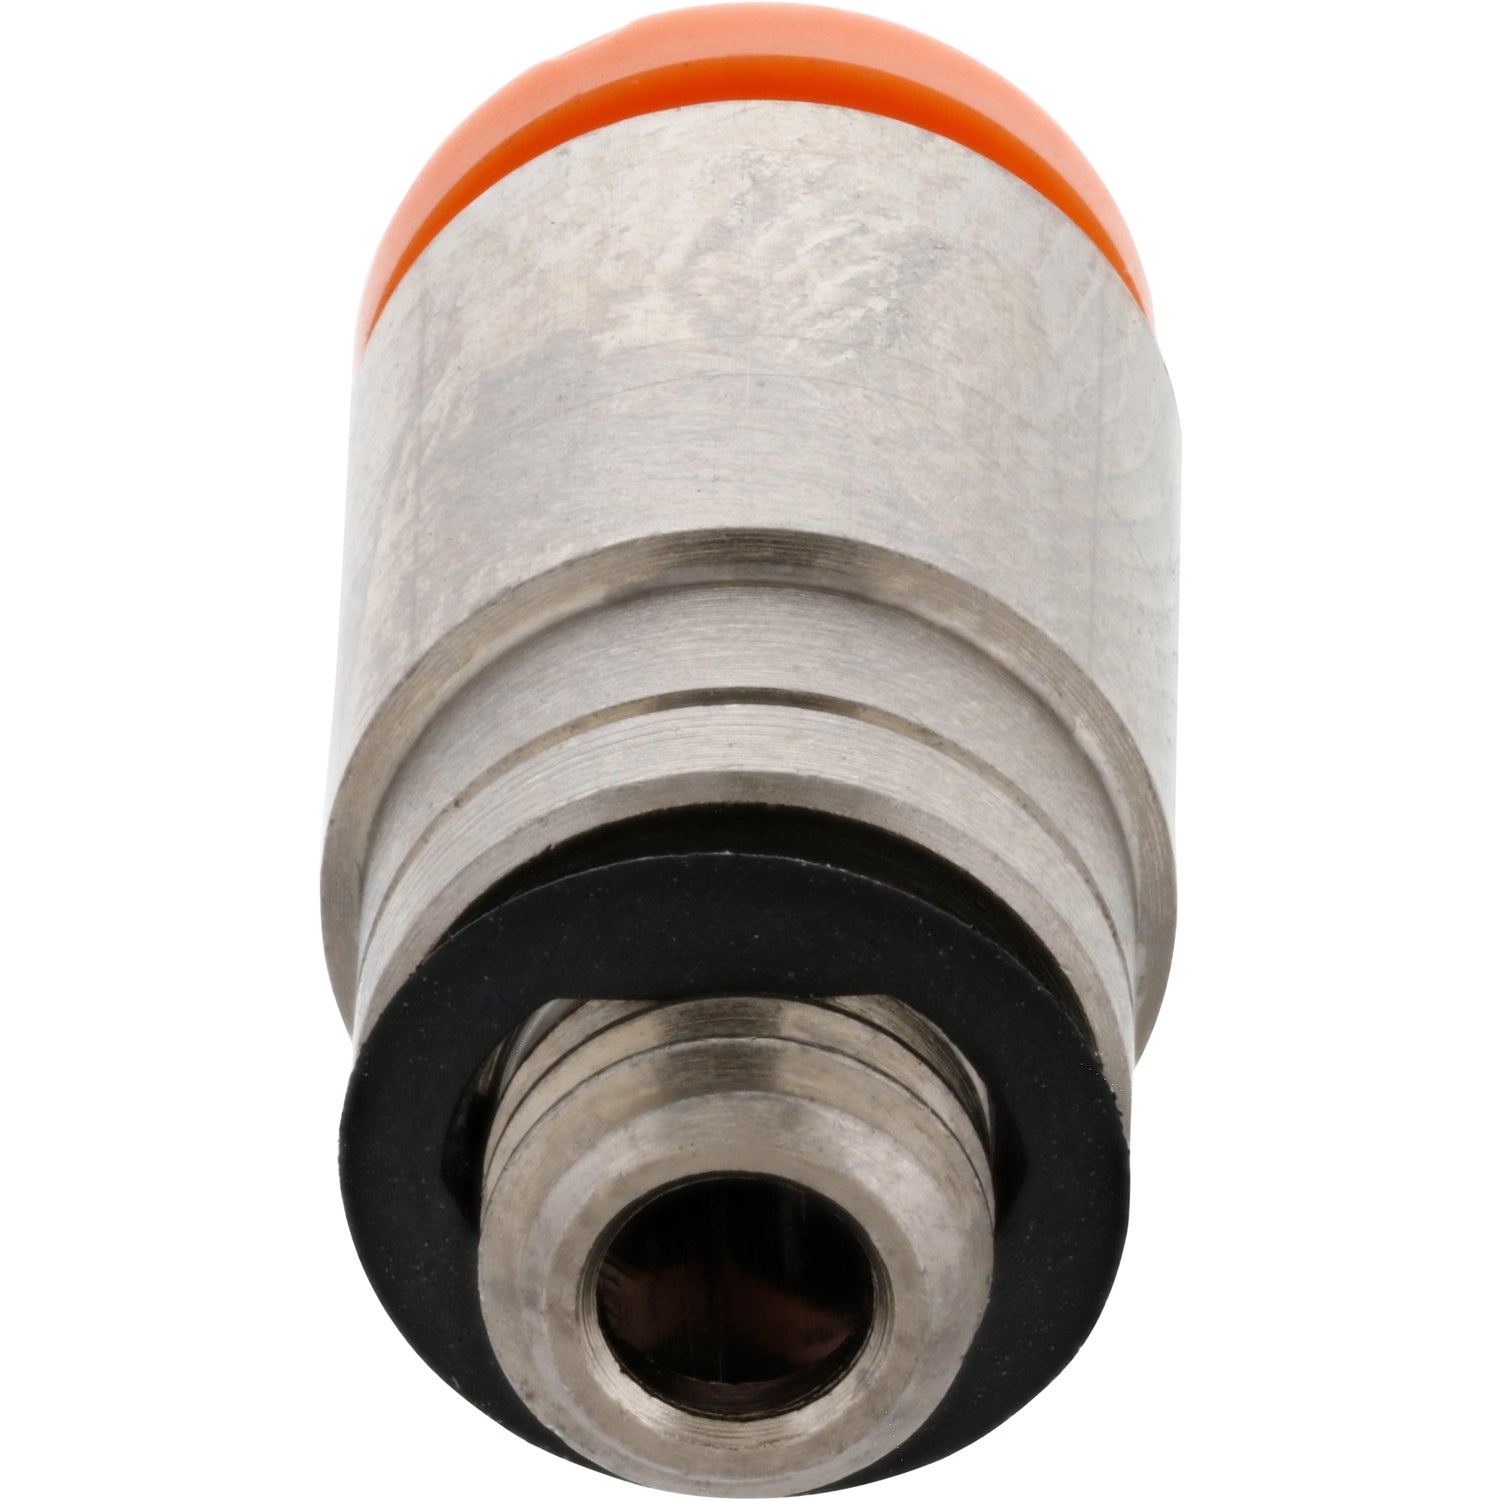 Straight brass connector with orange collar on white background. 